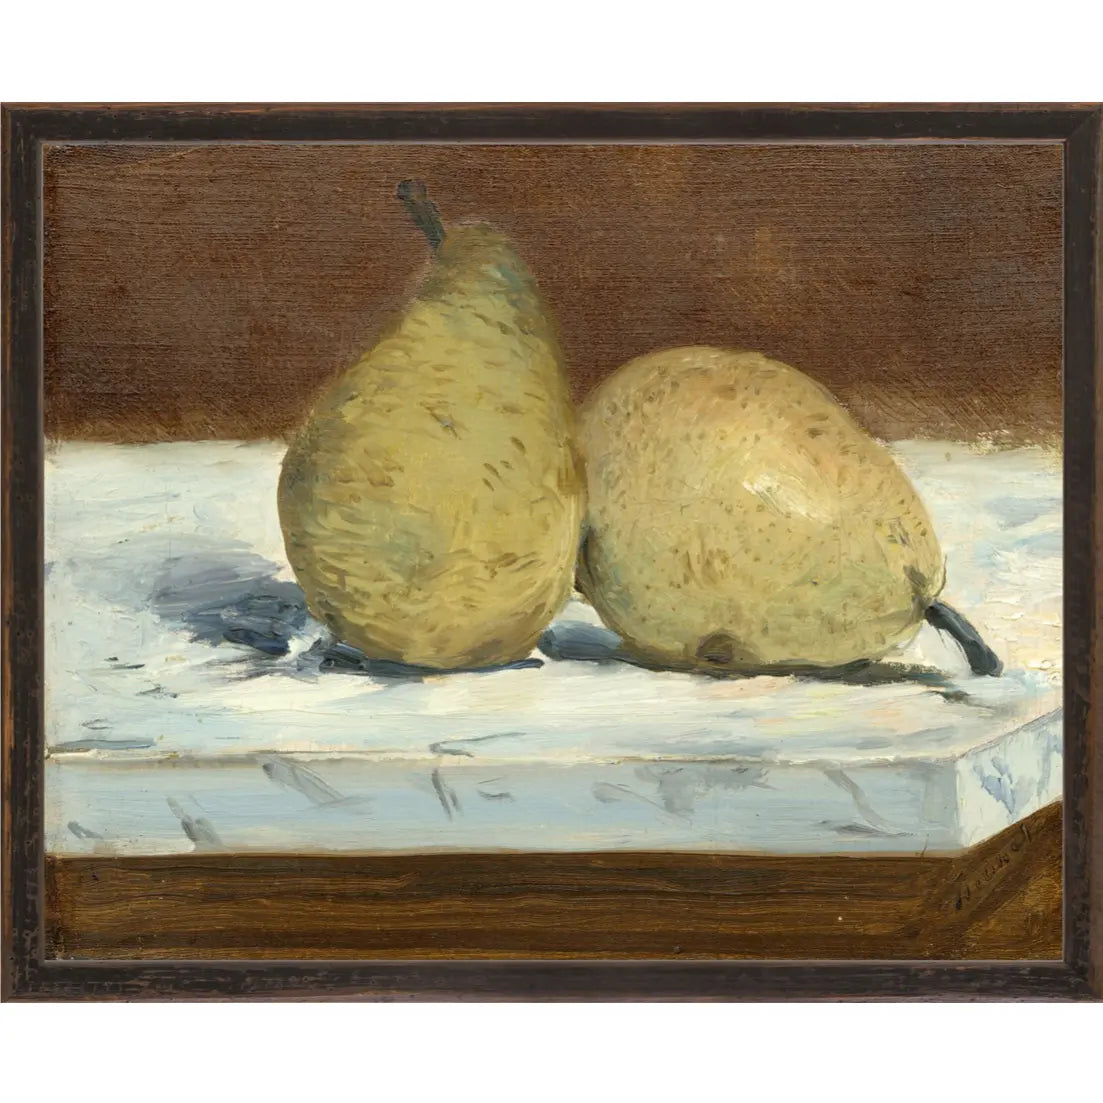 Pears c. 1880 - Home Smith